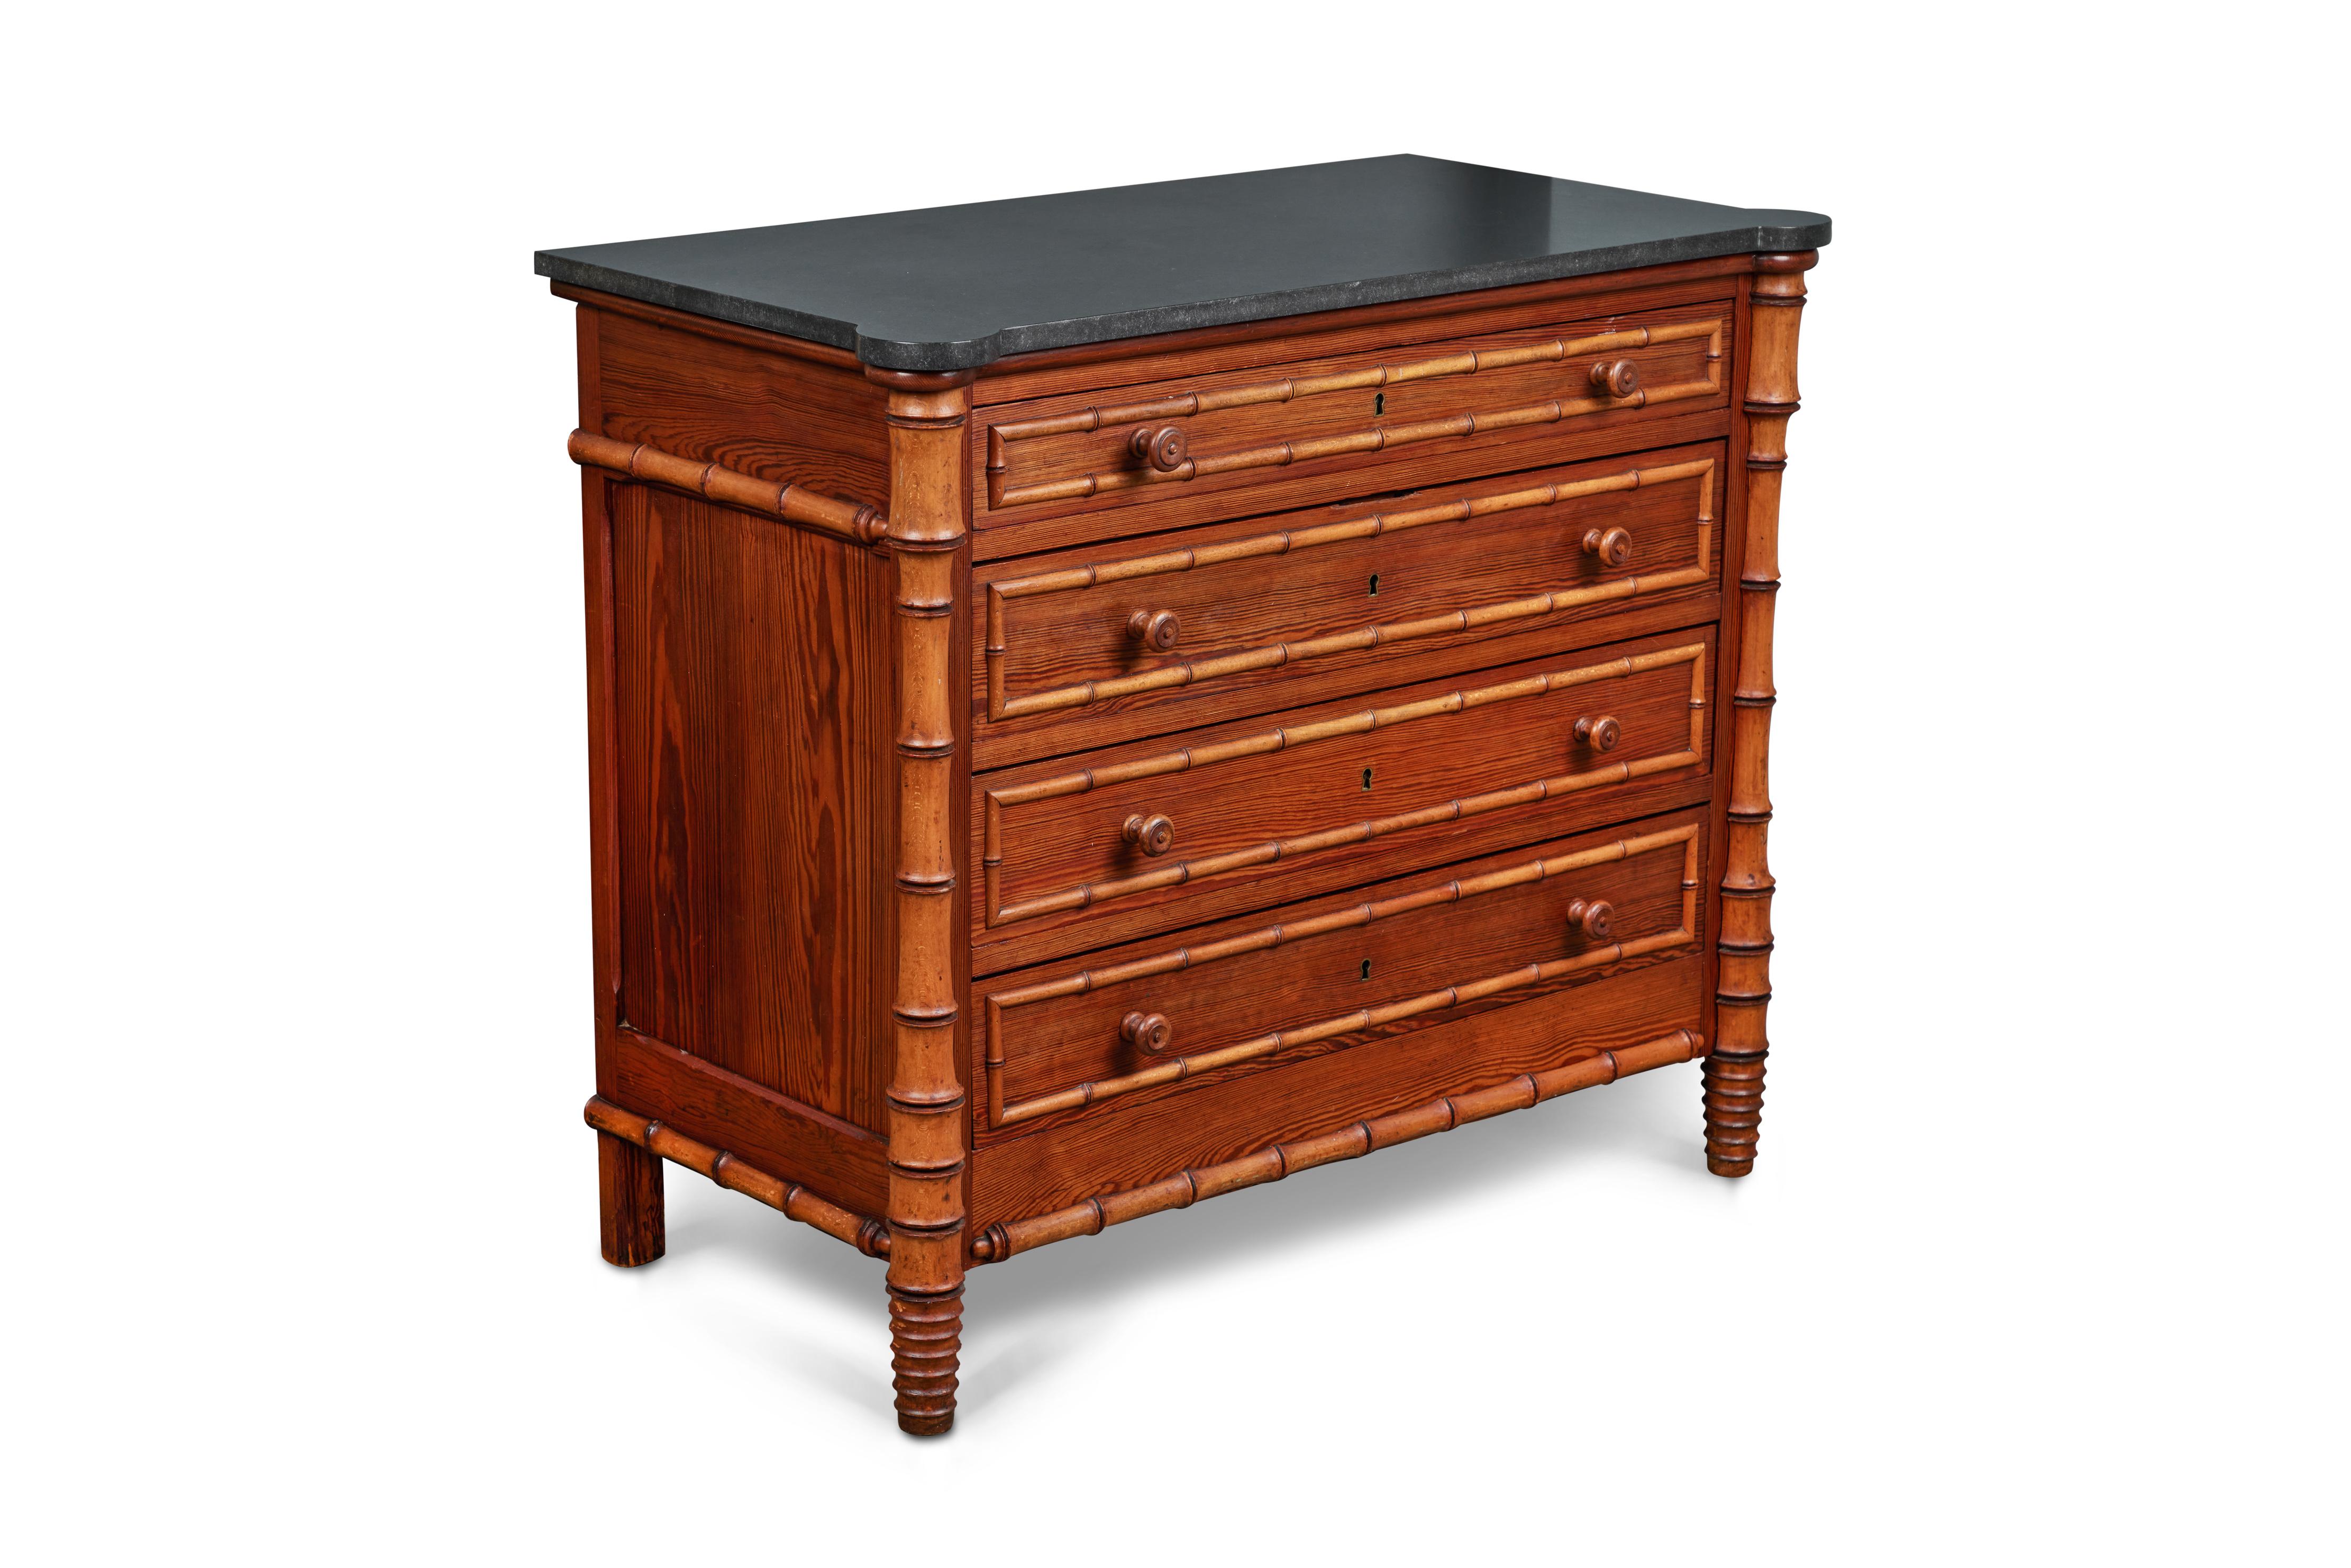 This fantastic 4 drawer pine chest was crafted with faux bamboo decorative mouldings and columns.

It is accented by a removable piece of rich complimentary honed black granite. This example of faux bamboo decoration was a style statement during